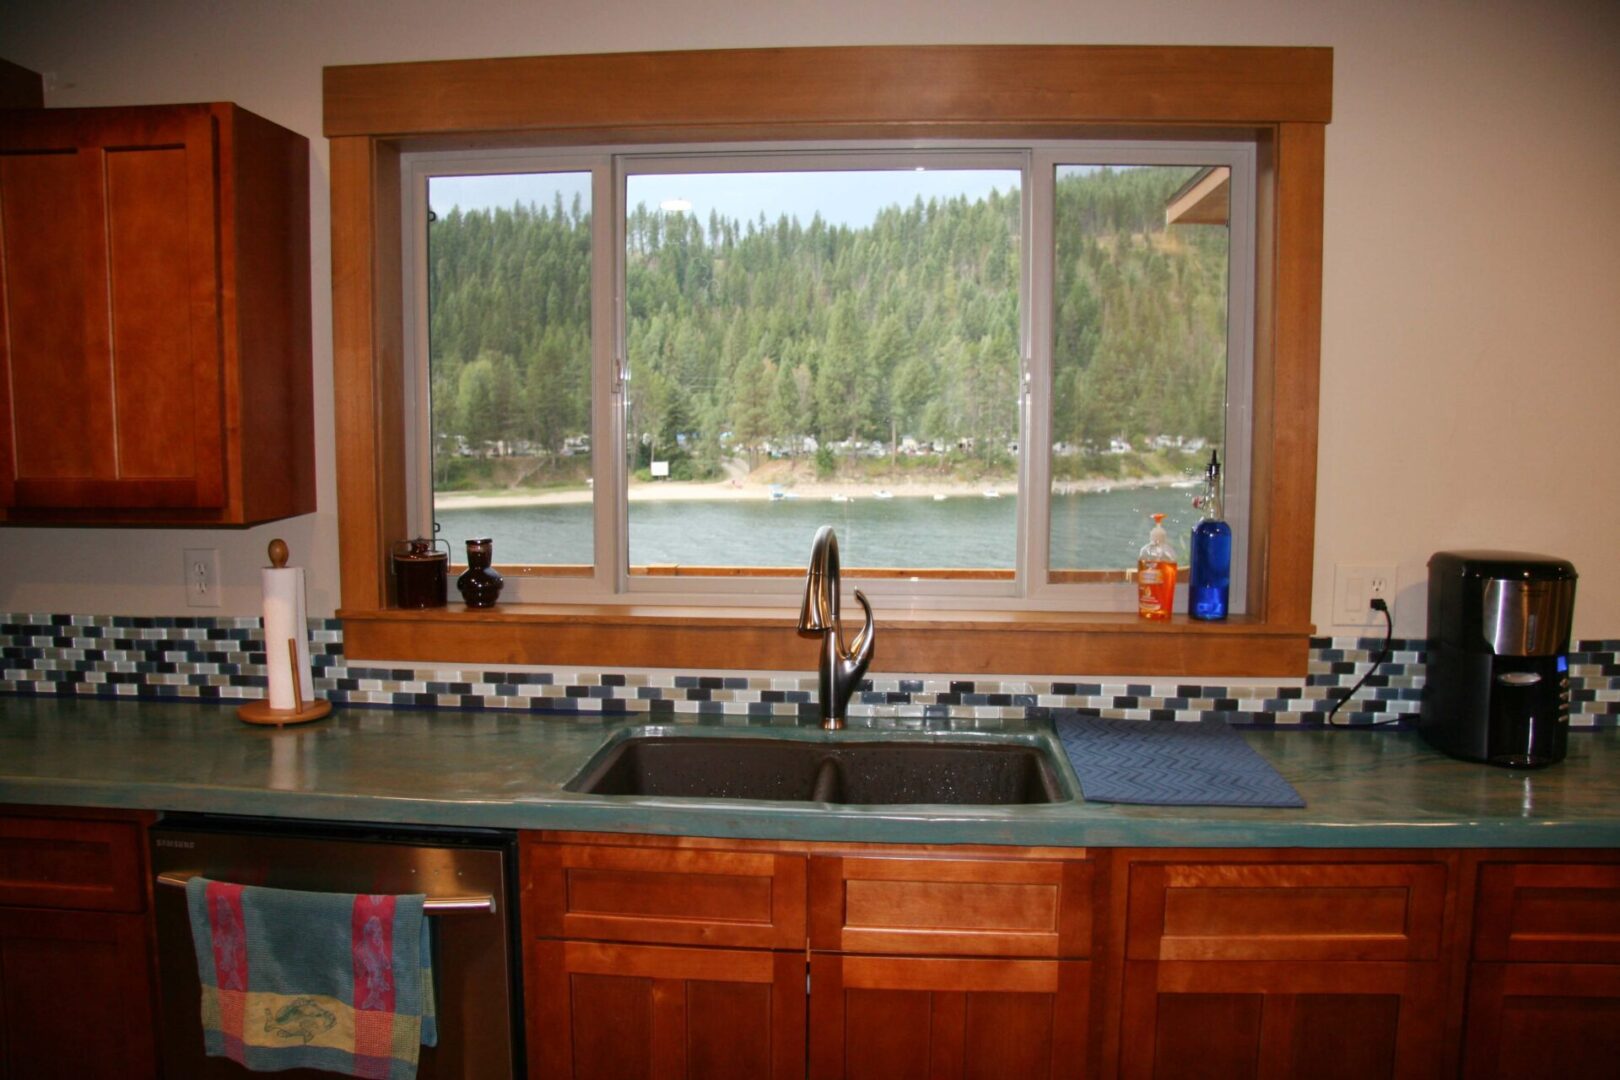 Wooden kitchen sink cabinet with a window overlooking a natural view